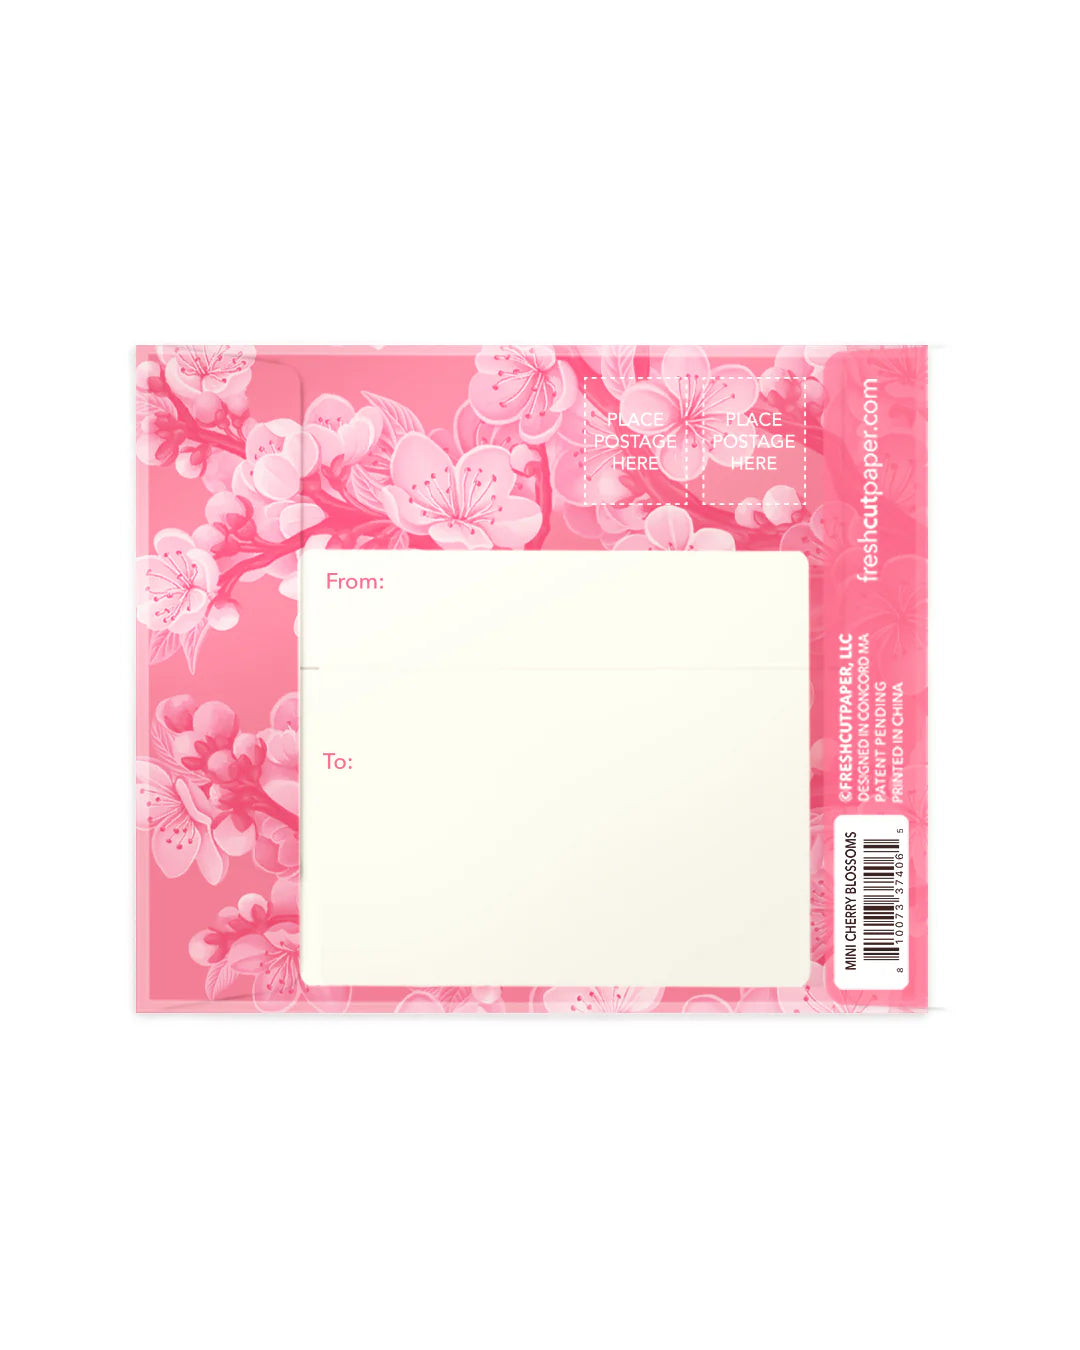 back view of Cherry Blossom mailing envelope.